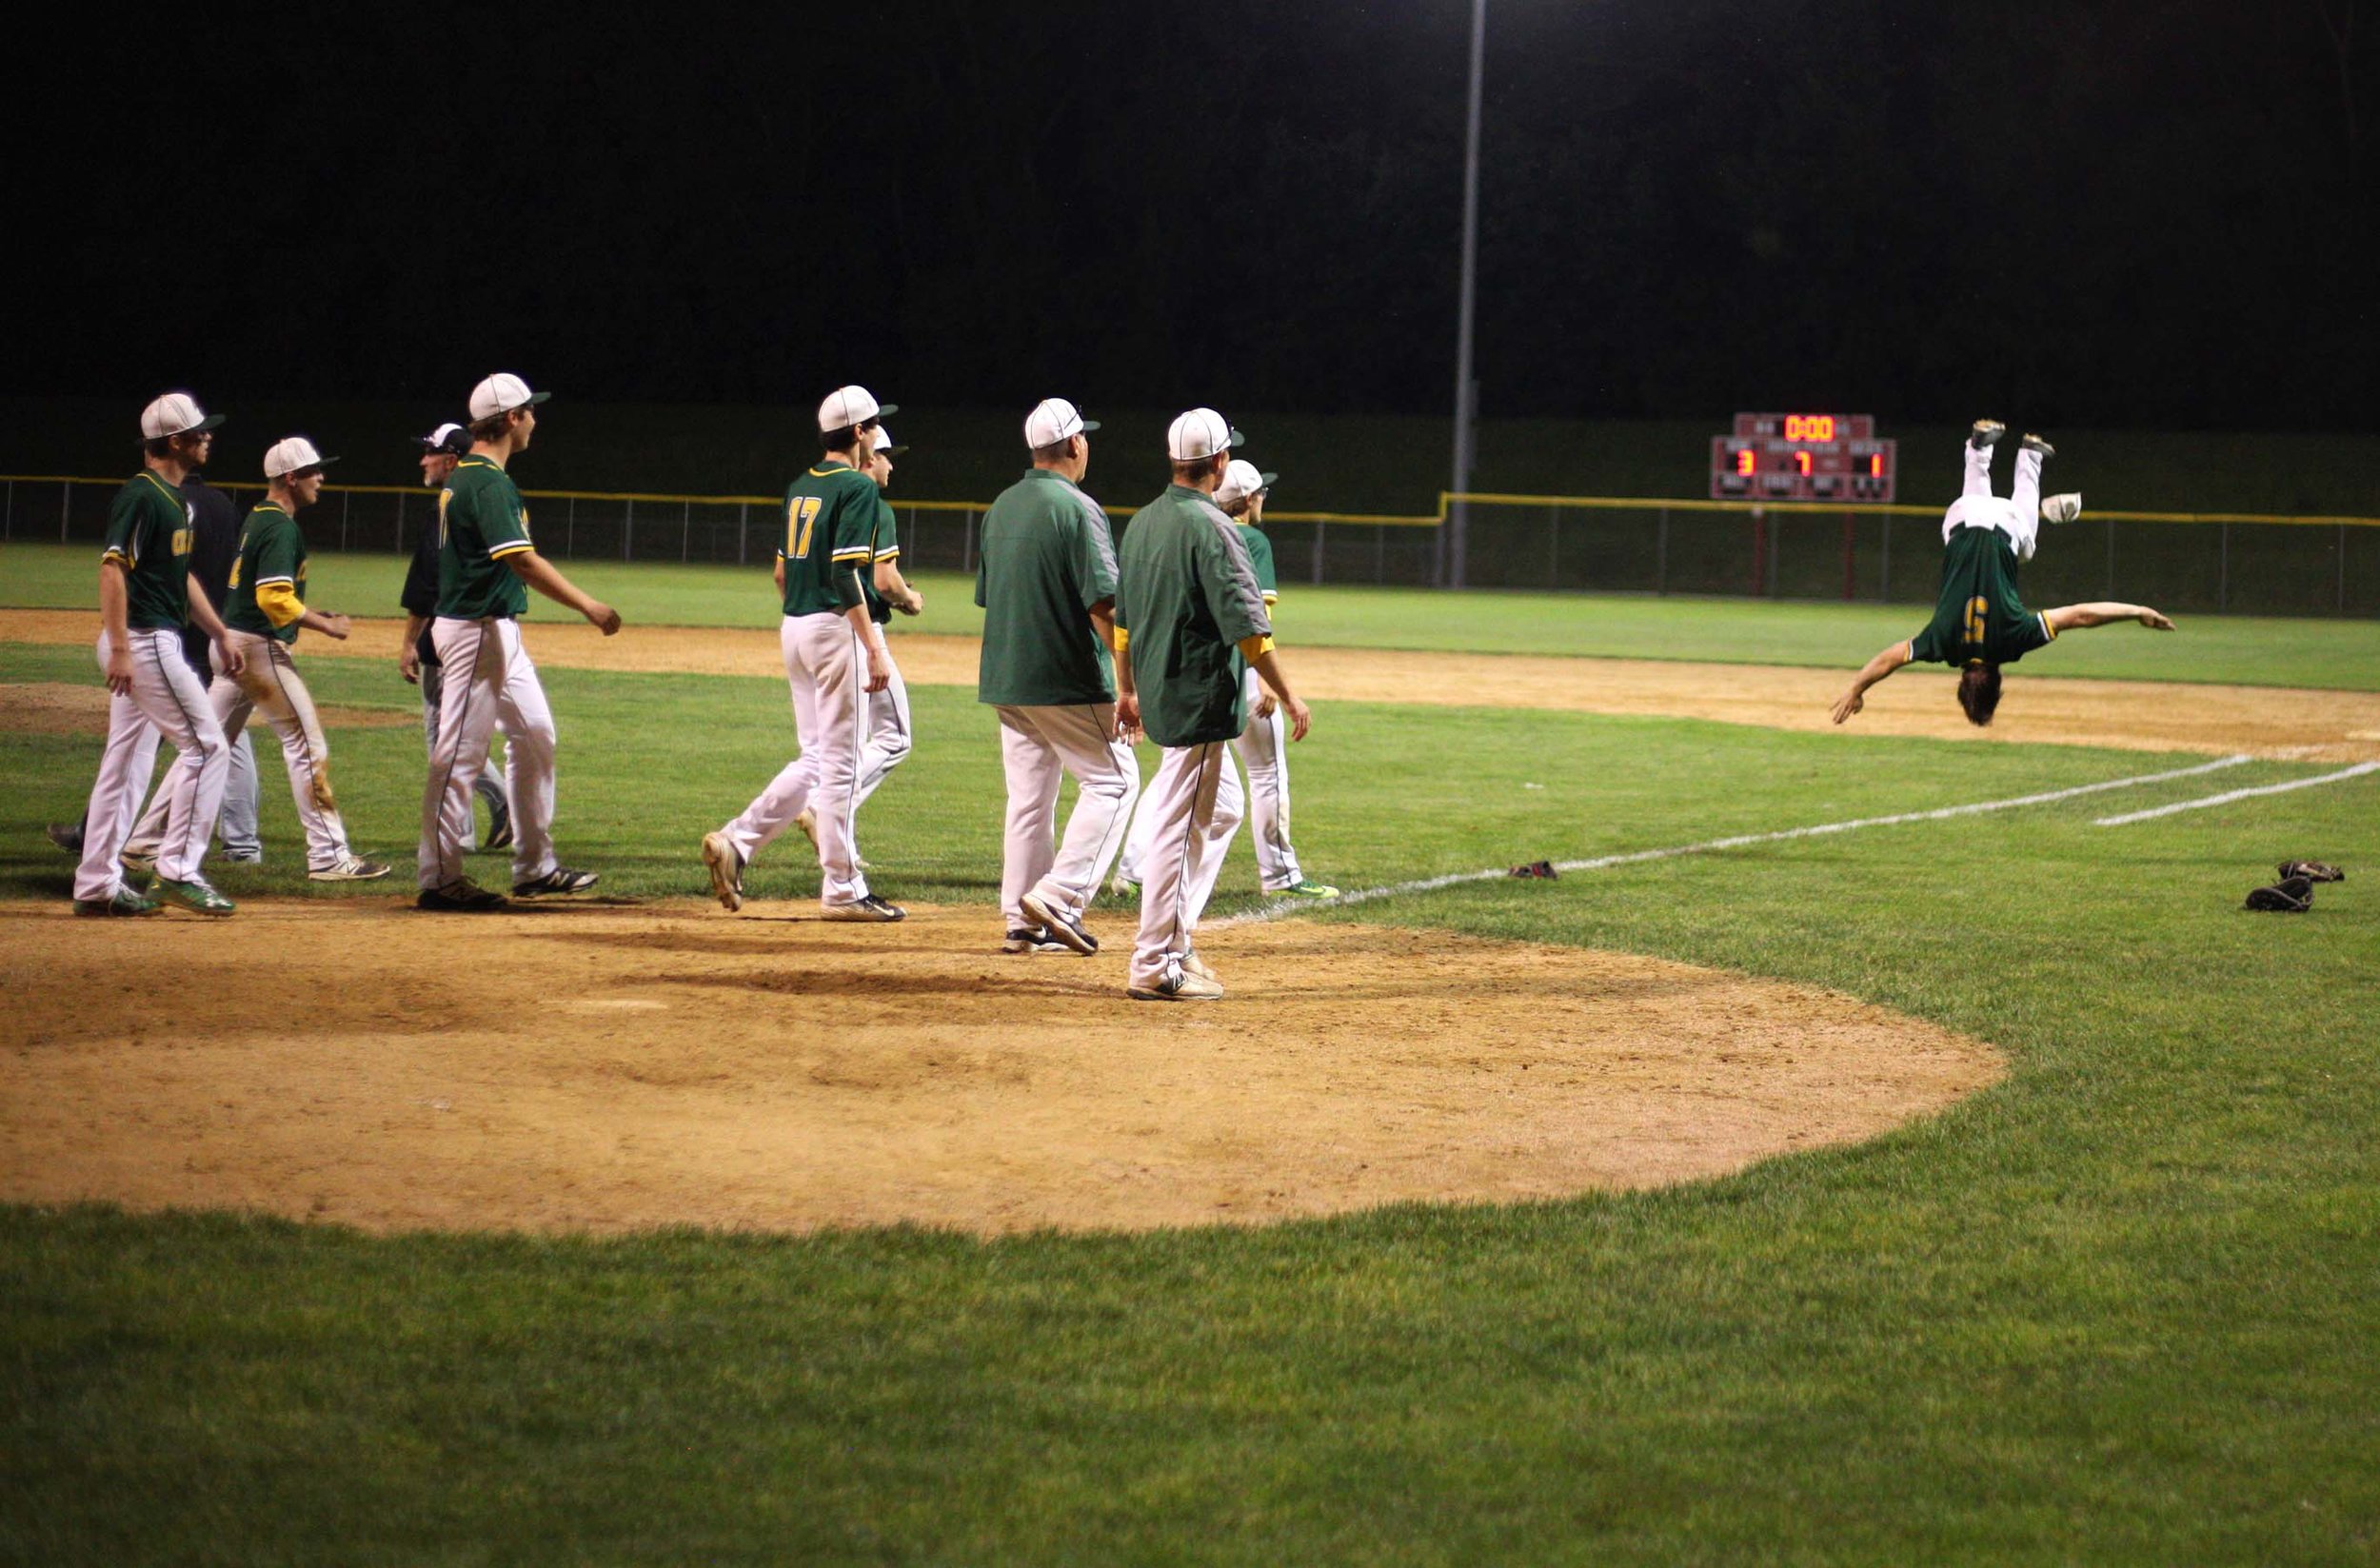  Coal City player Brendan Nevin celebrates with a flip Tuesday night after a victory over Illiana Christian.    